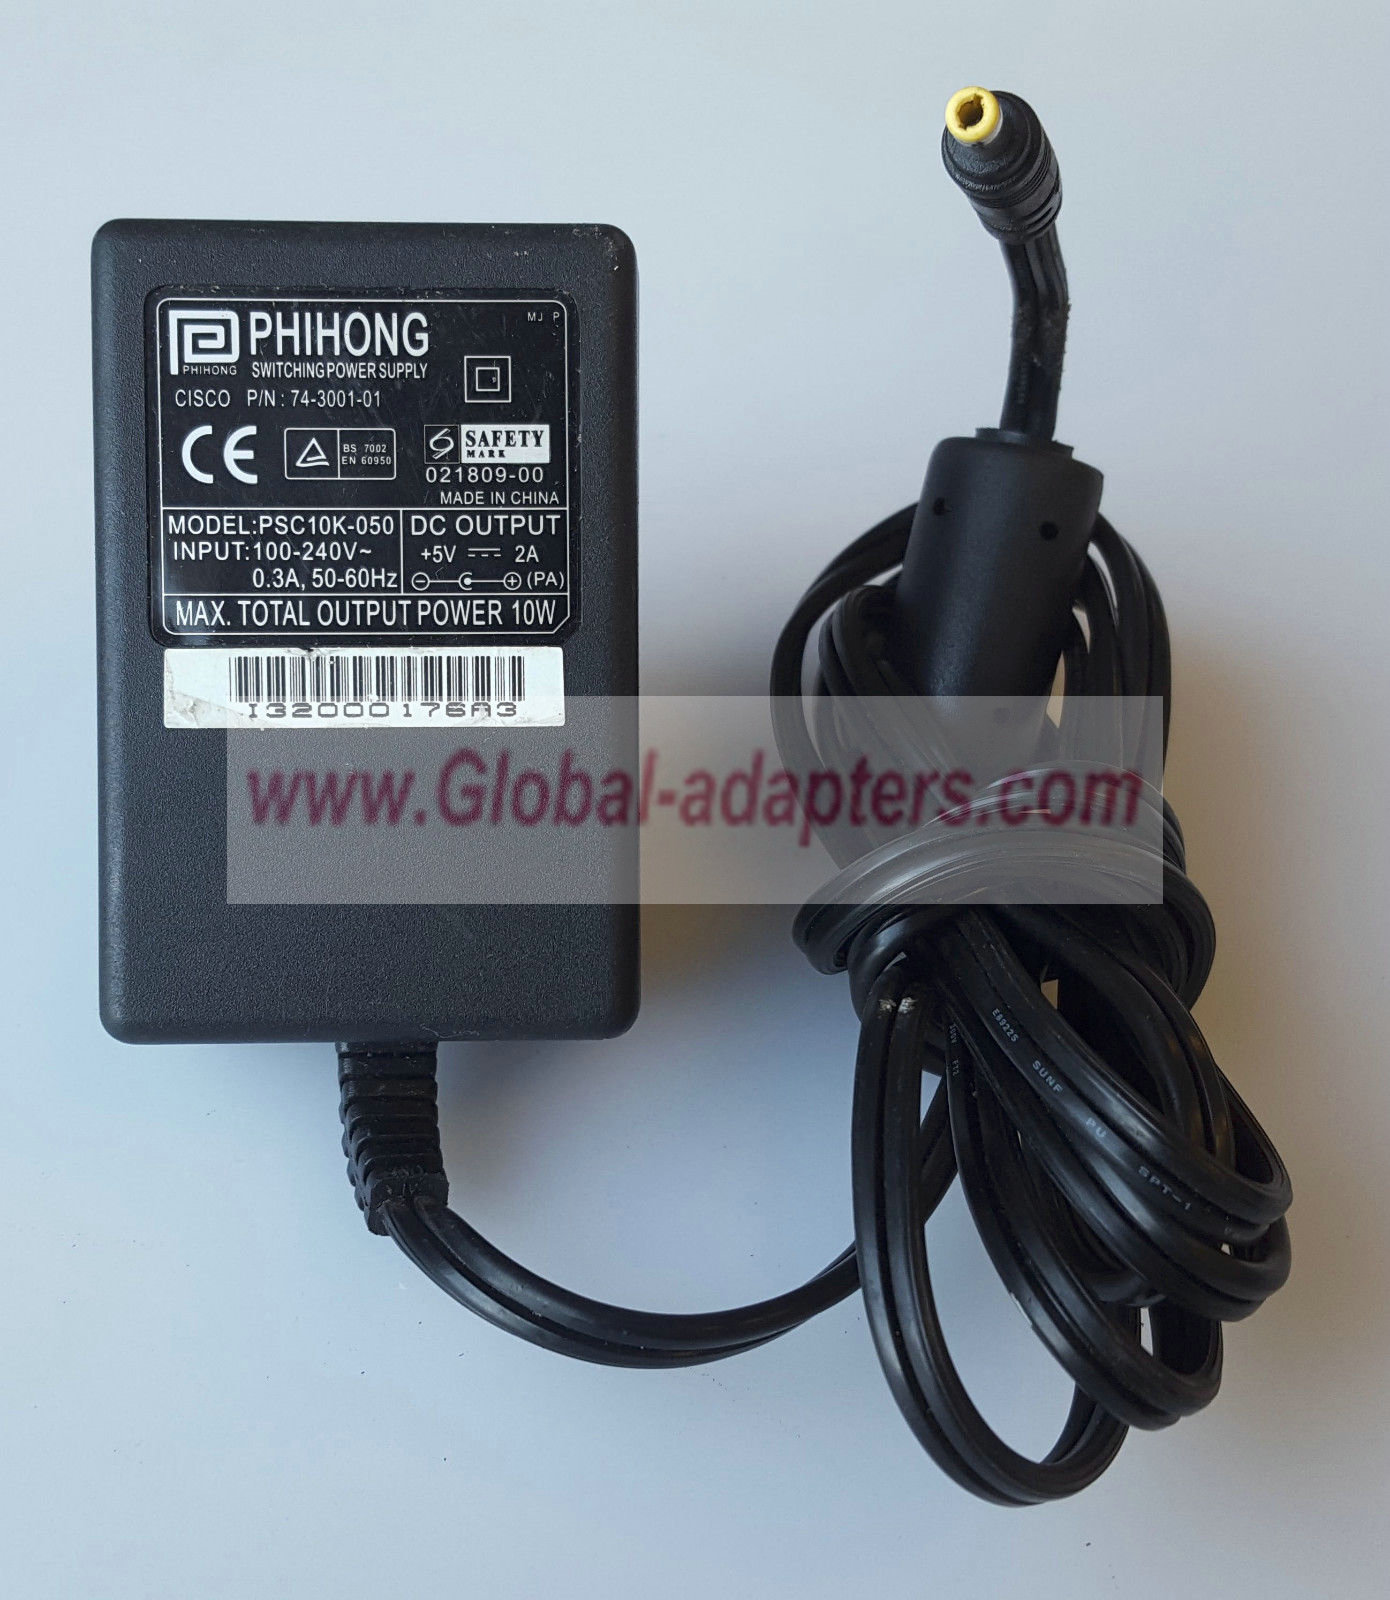 NEW 5V 2A PHIHONG PSC10K-050 74-3001-01 AC/DC POWER SUPPLY ADAPTER - Click Image to Close